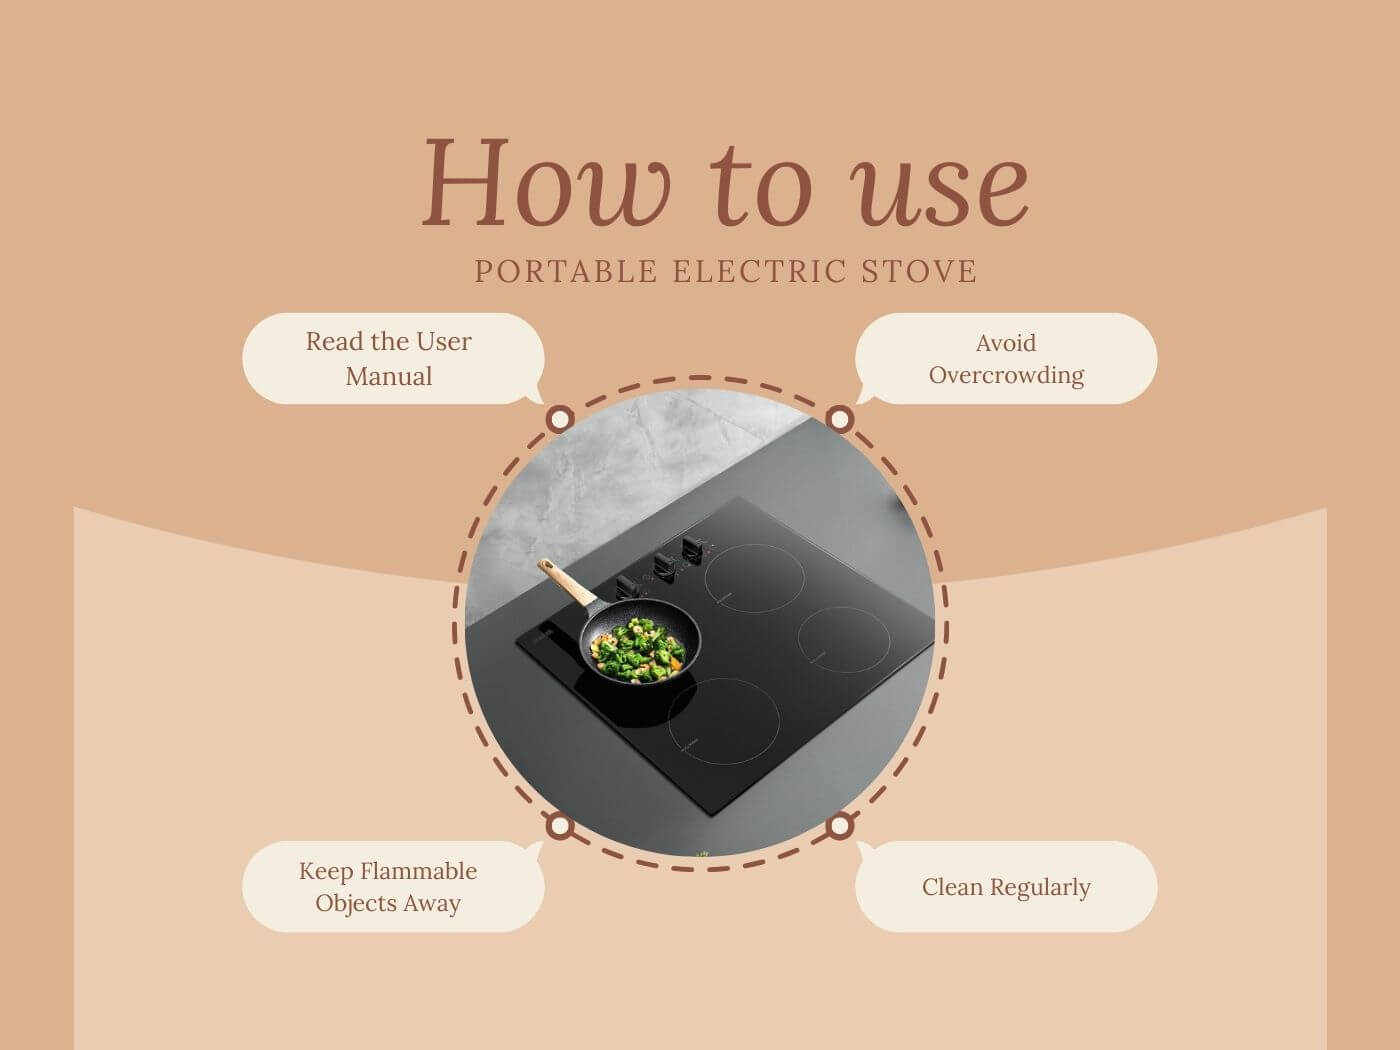 How to Use Karinear Portable Electric Stove？